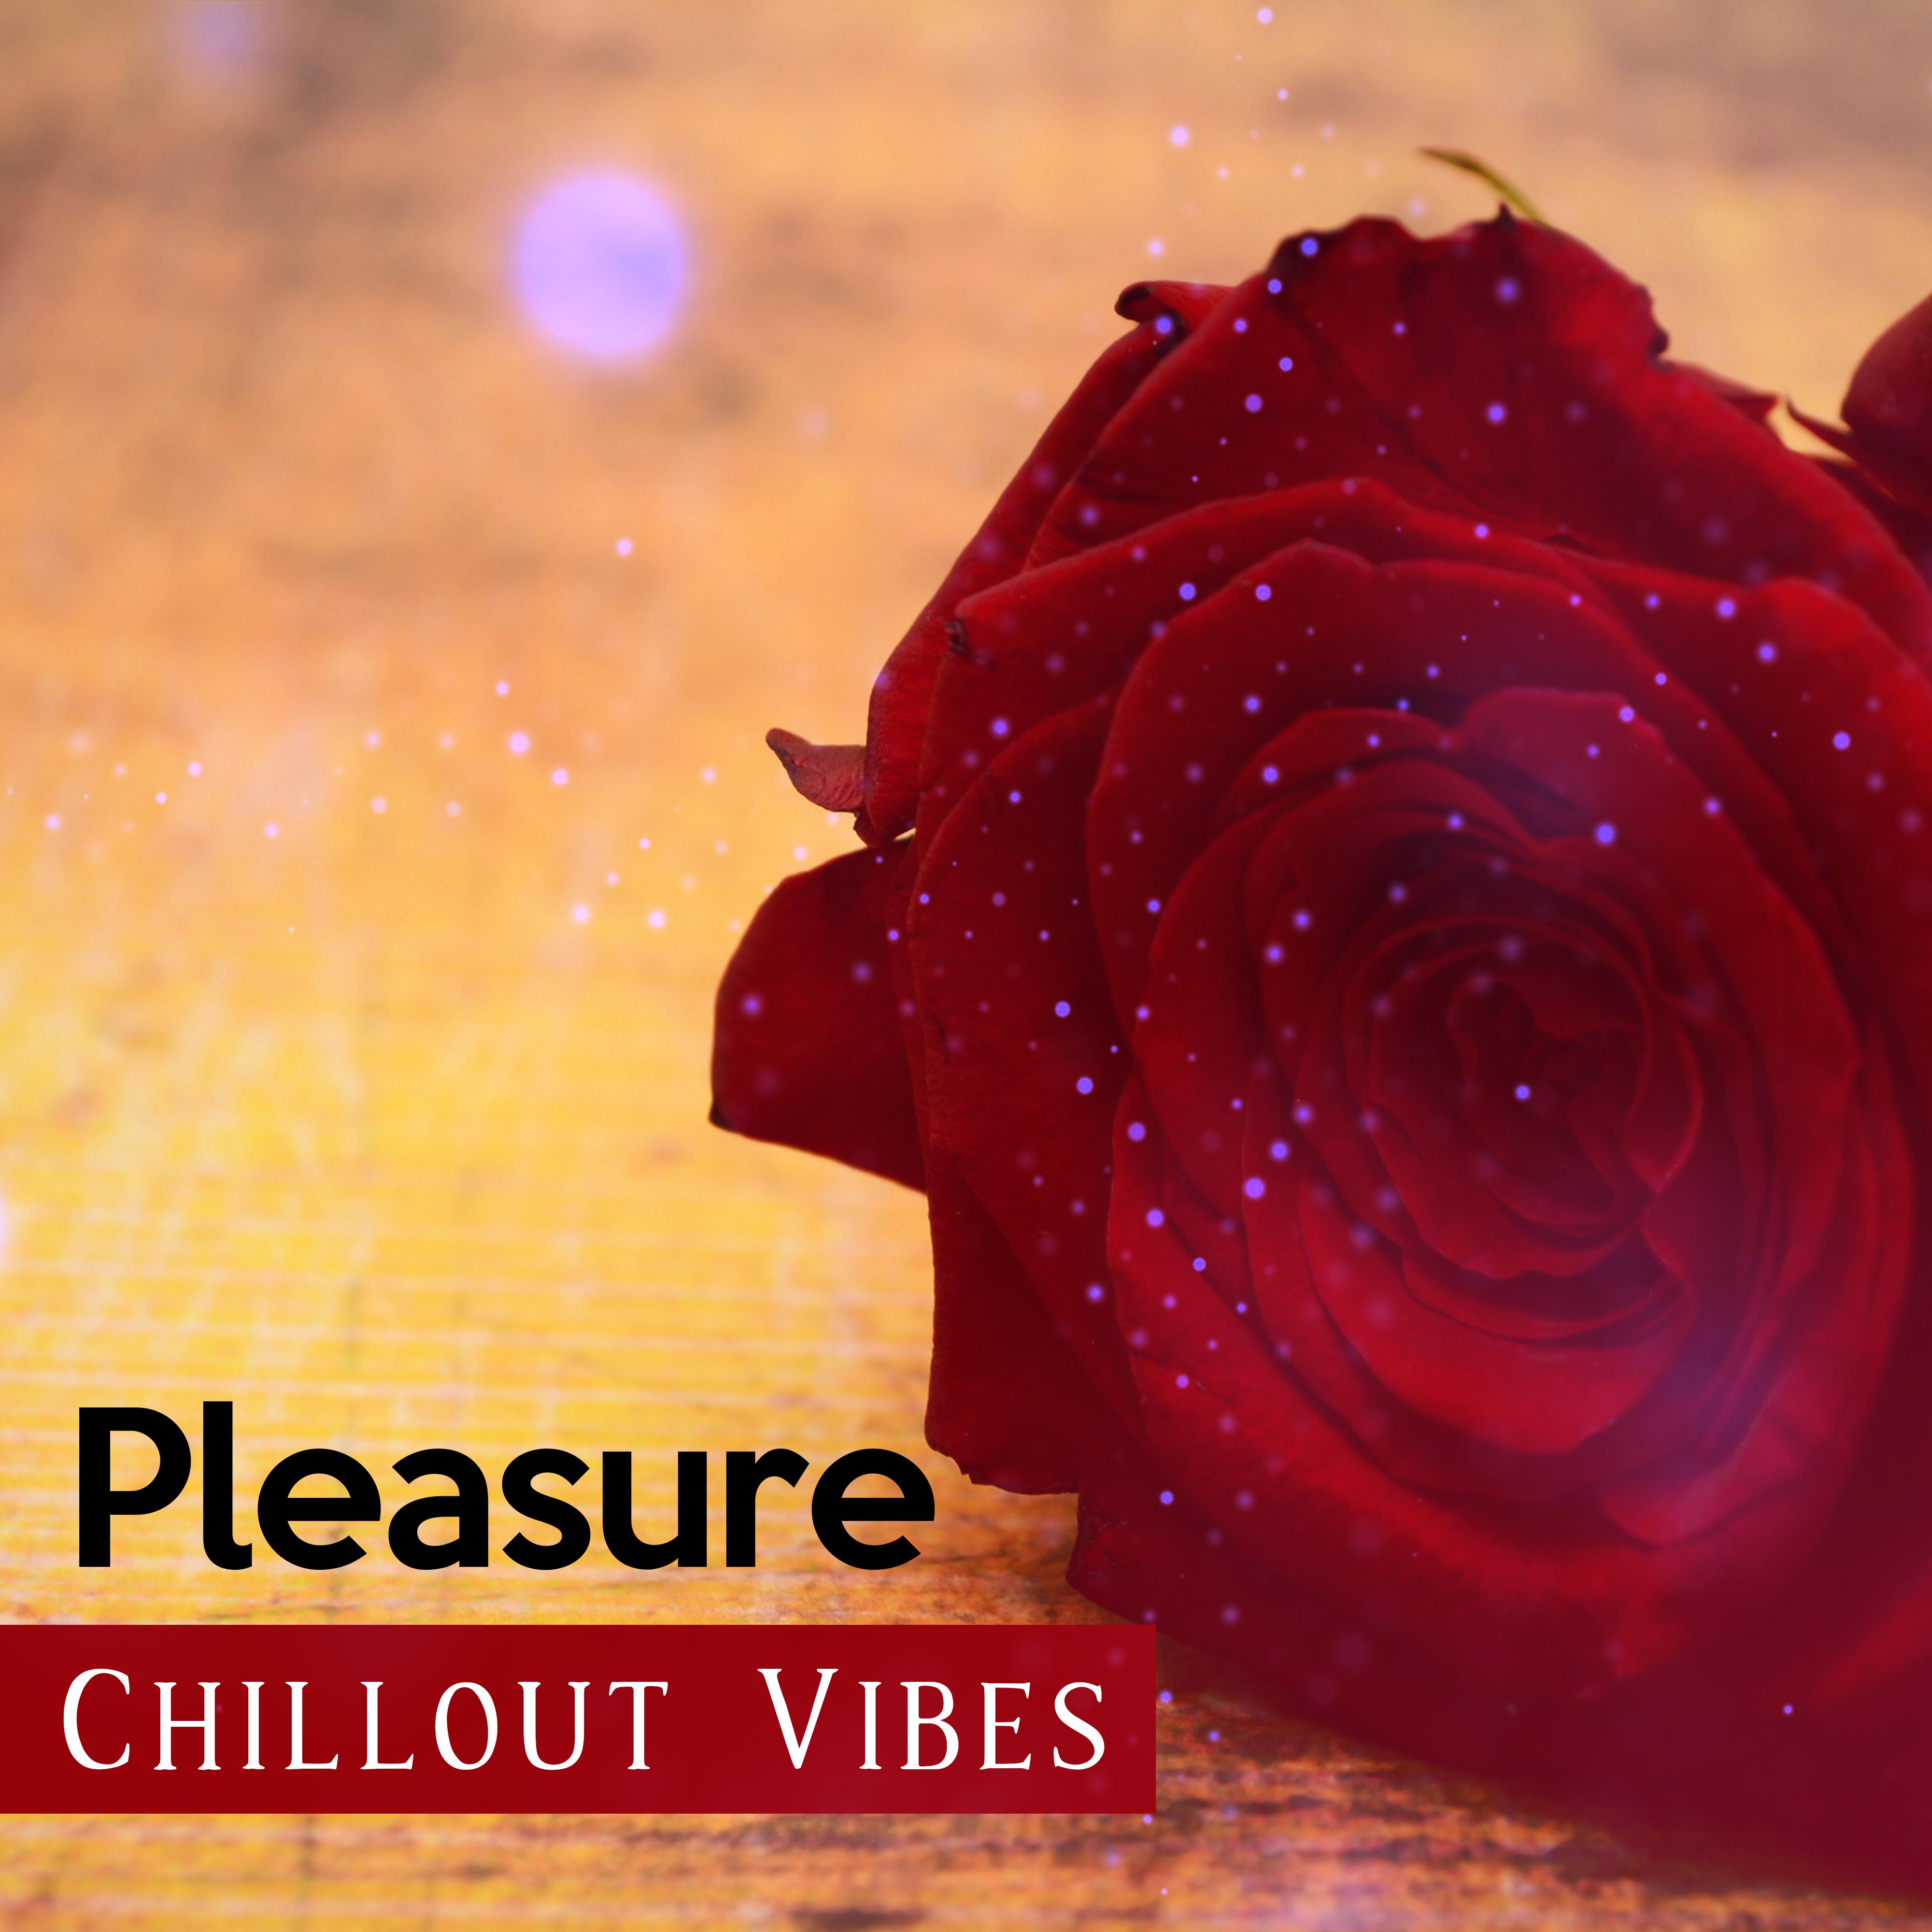 Pleasure Chillout Vibes – Chill Out Music, **** Vibrations, Erotic Game Background